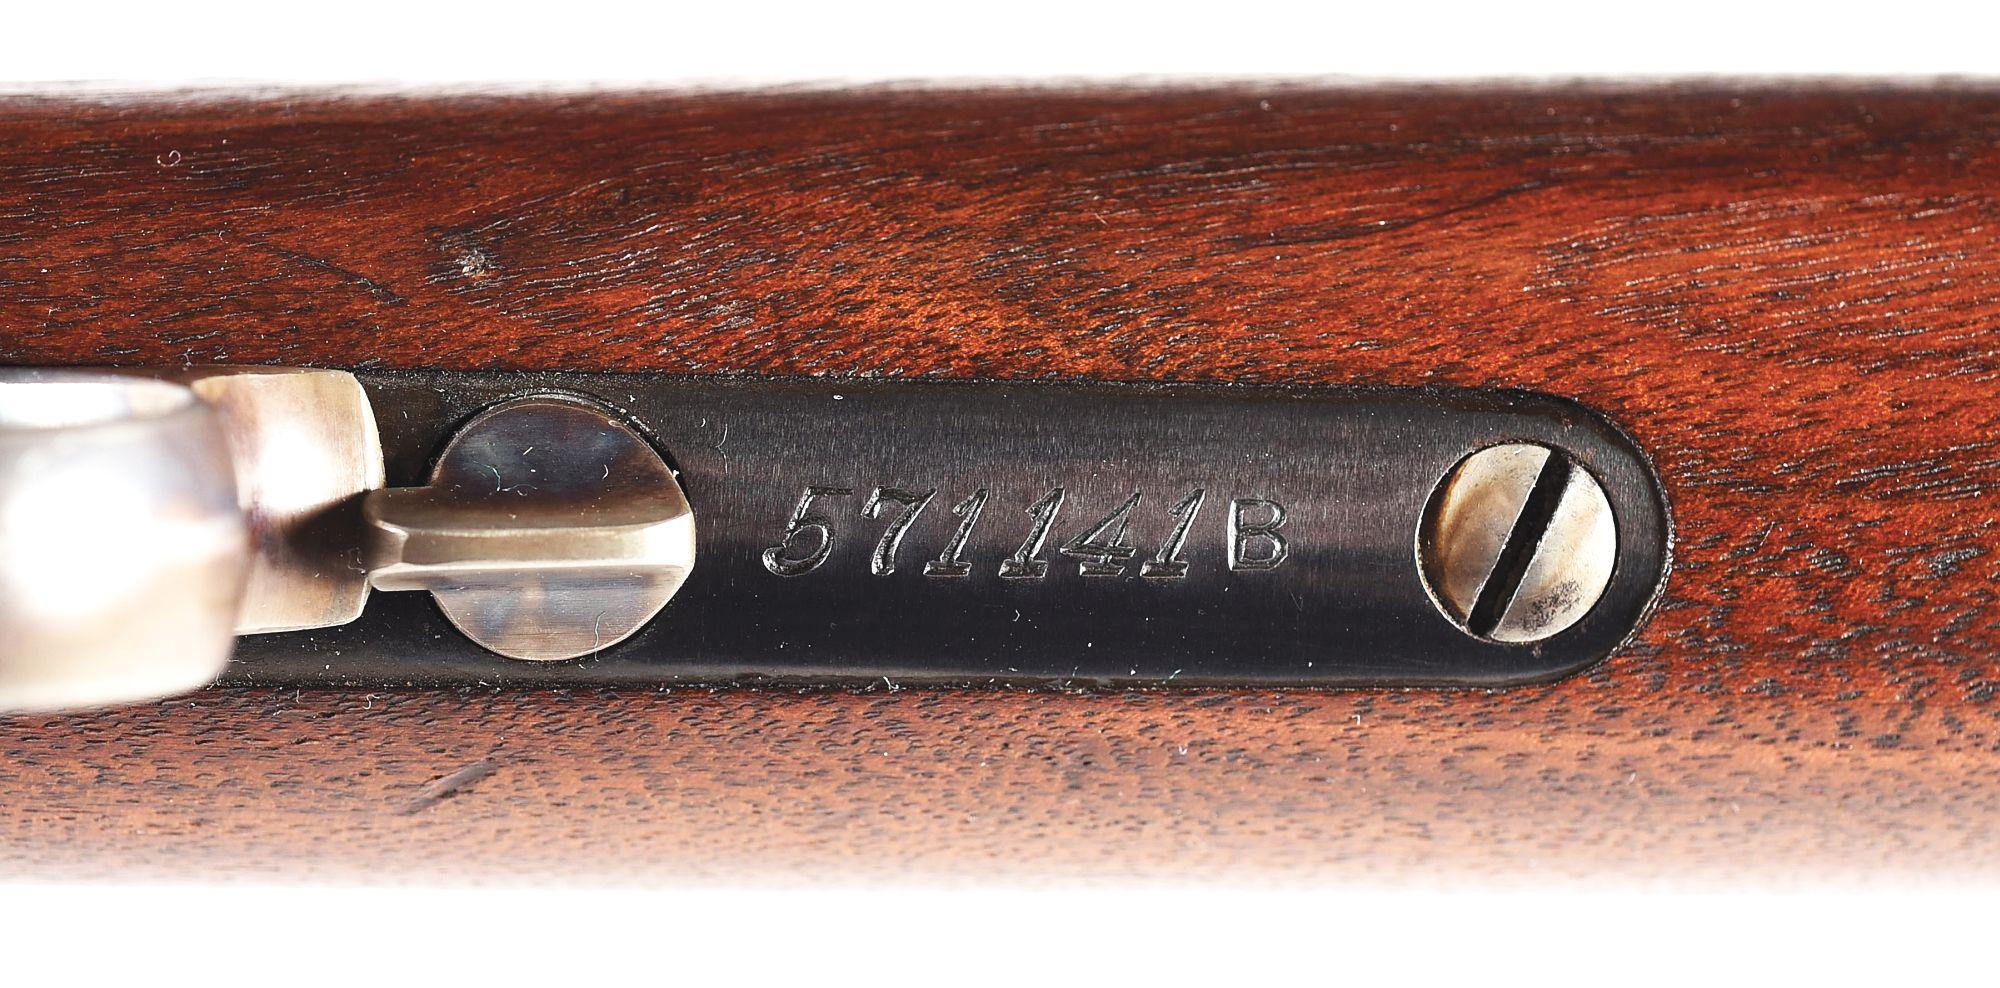 (C) WINCHESTER MODEL 1873 THIRD MODEL LEVER ACTION RIFLE IN MUSKET CONFIGURATION.